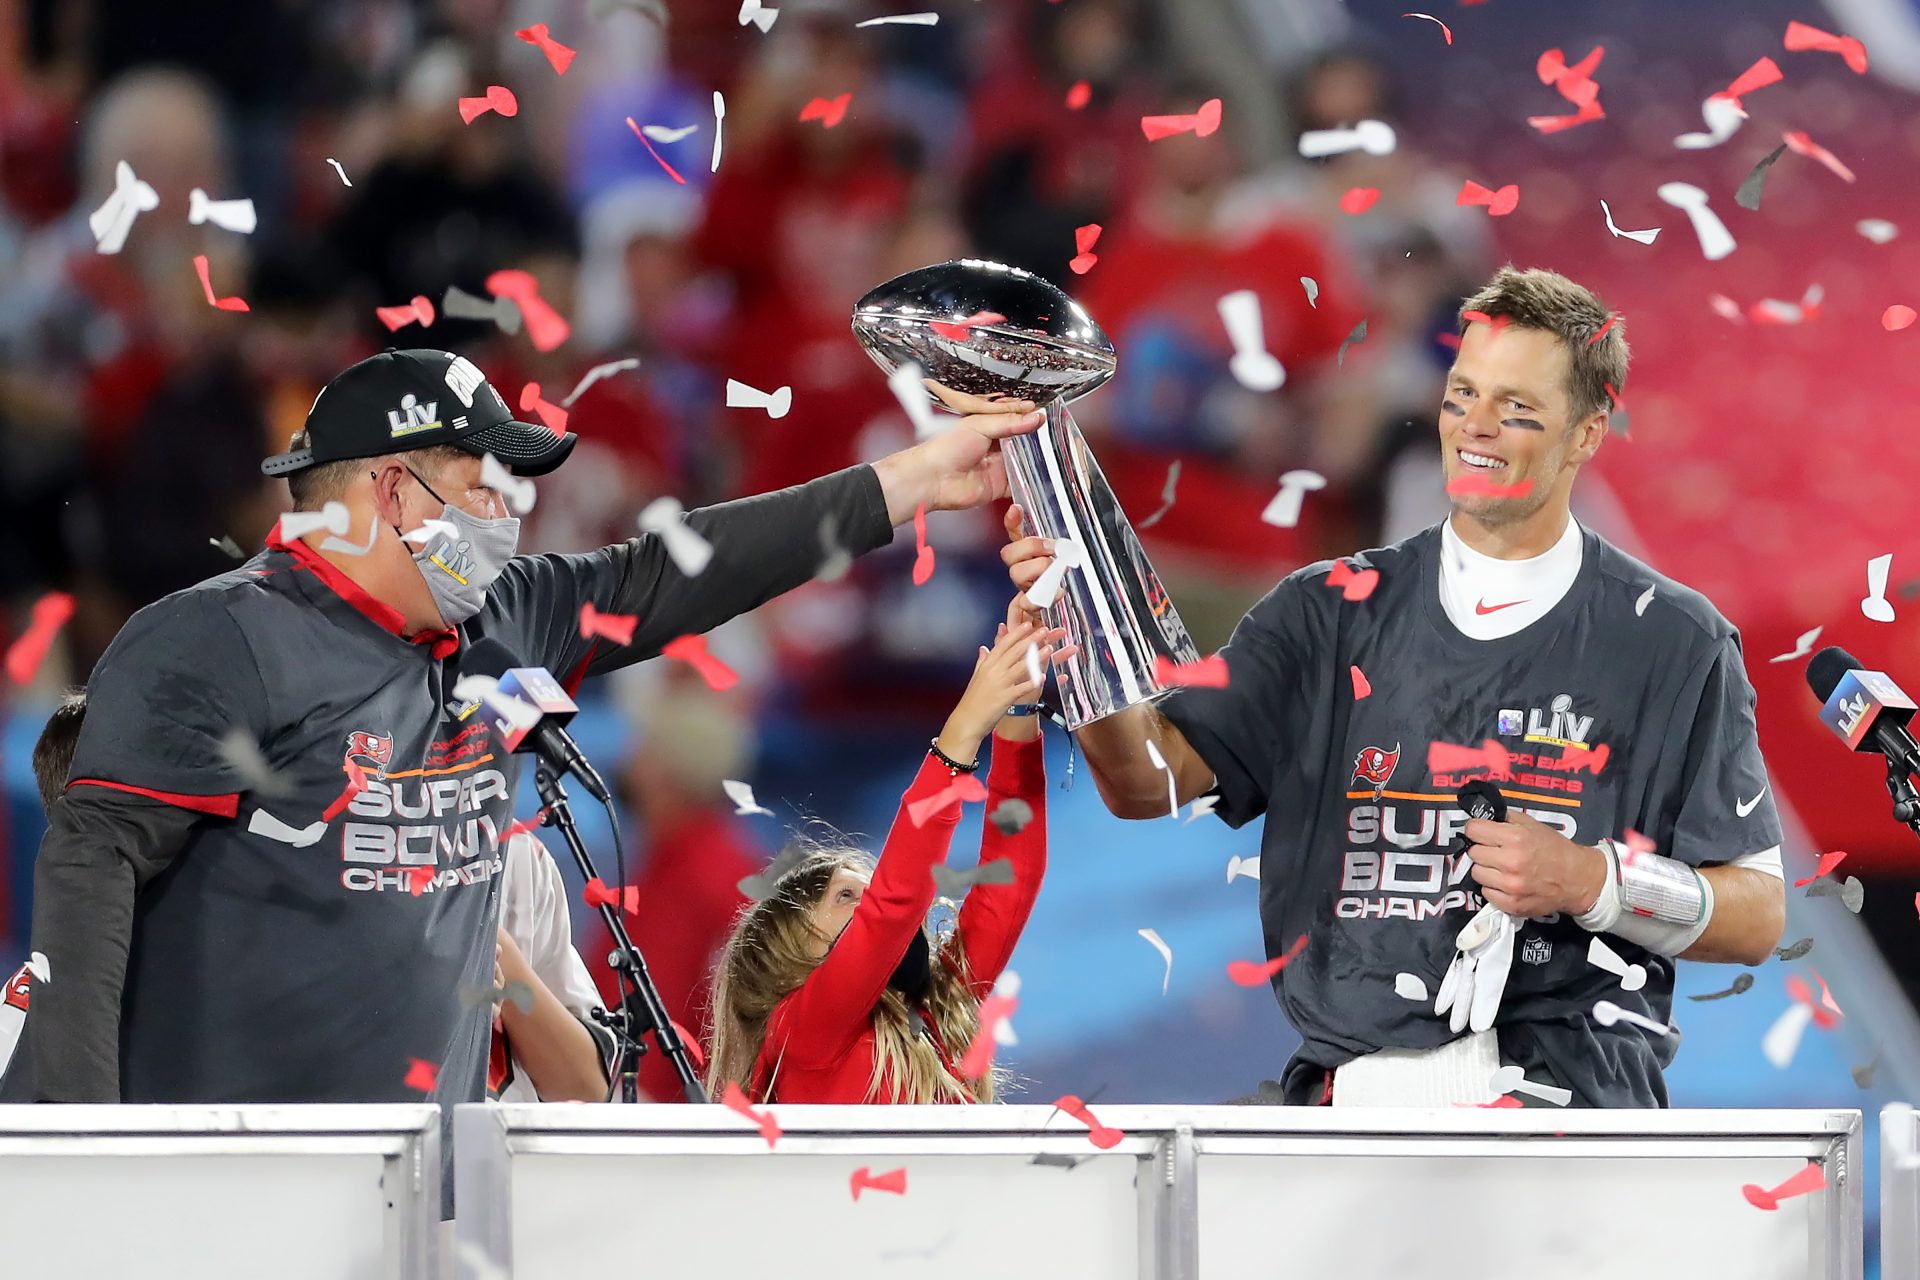 Tom Brady, Bucs Rating Big Bowl 55 Rings: ‘My Popular Ring Is the Subsequent One’